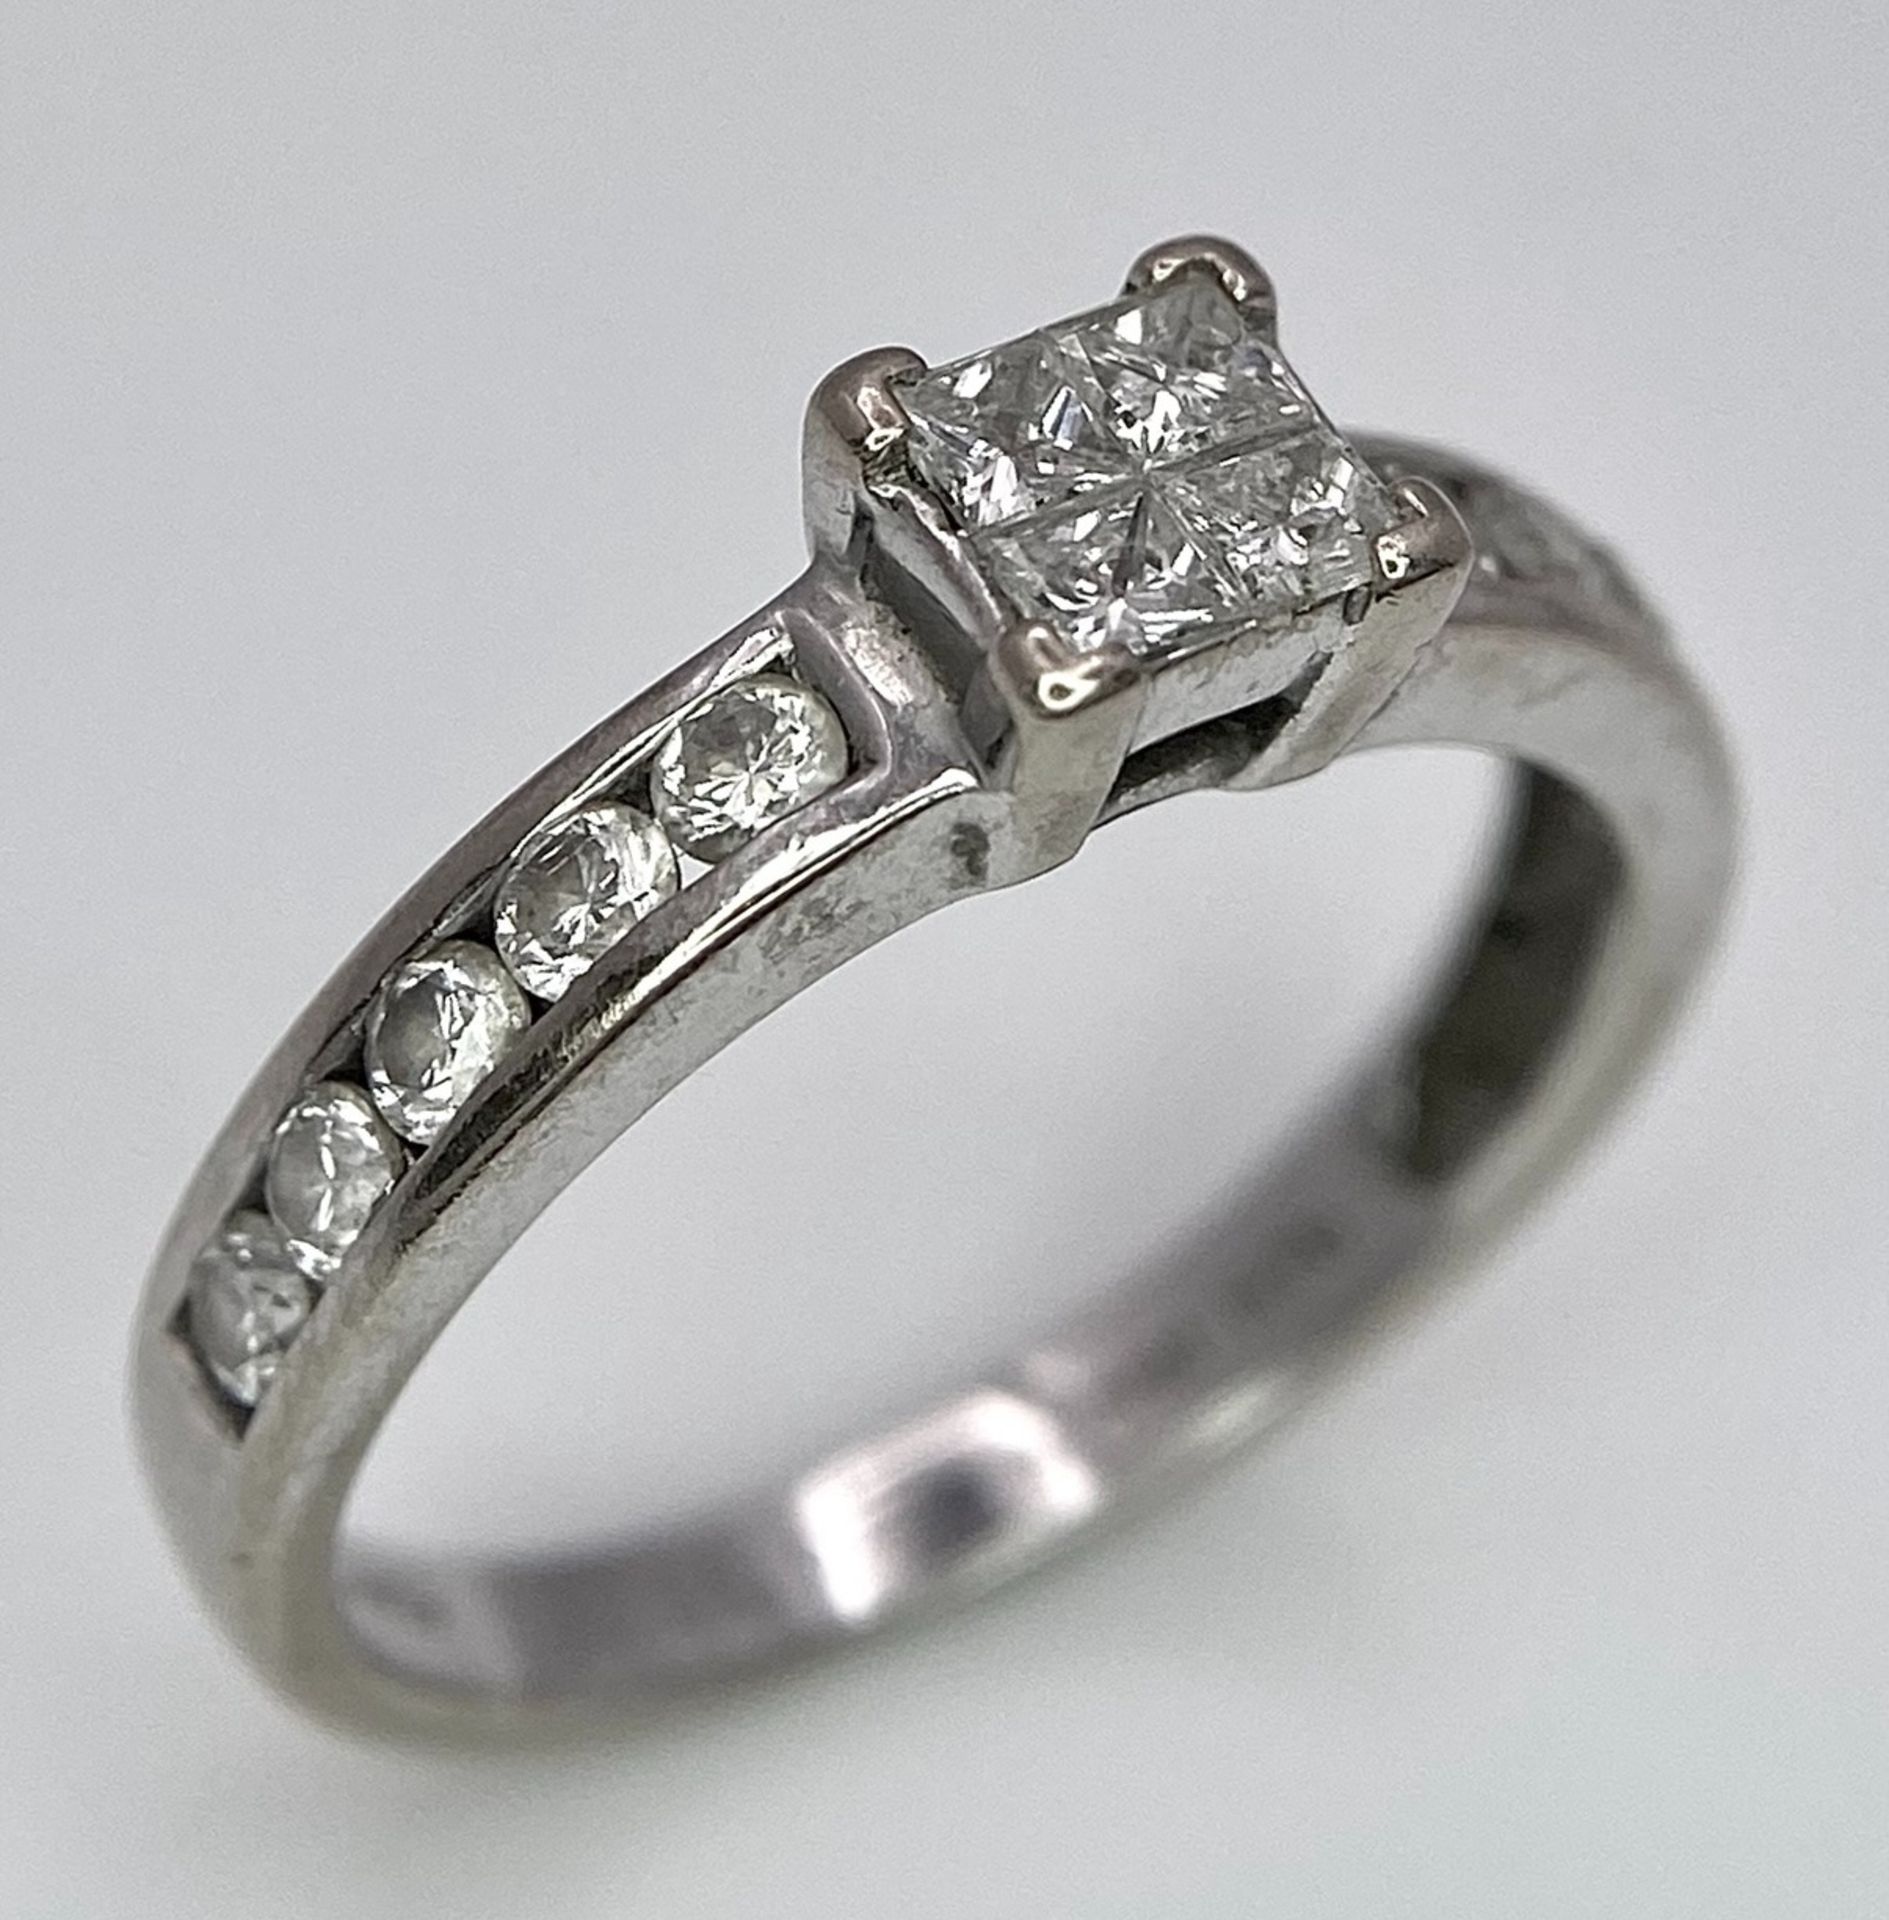 An 18K White Gold and Diamond Ring. Square and round cut diamonds. Size J. 2.6g total weight. - Image 5 of 7